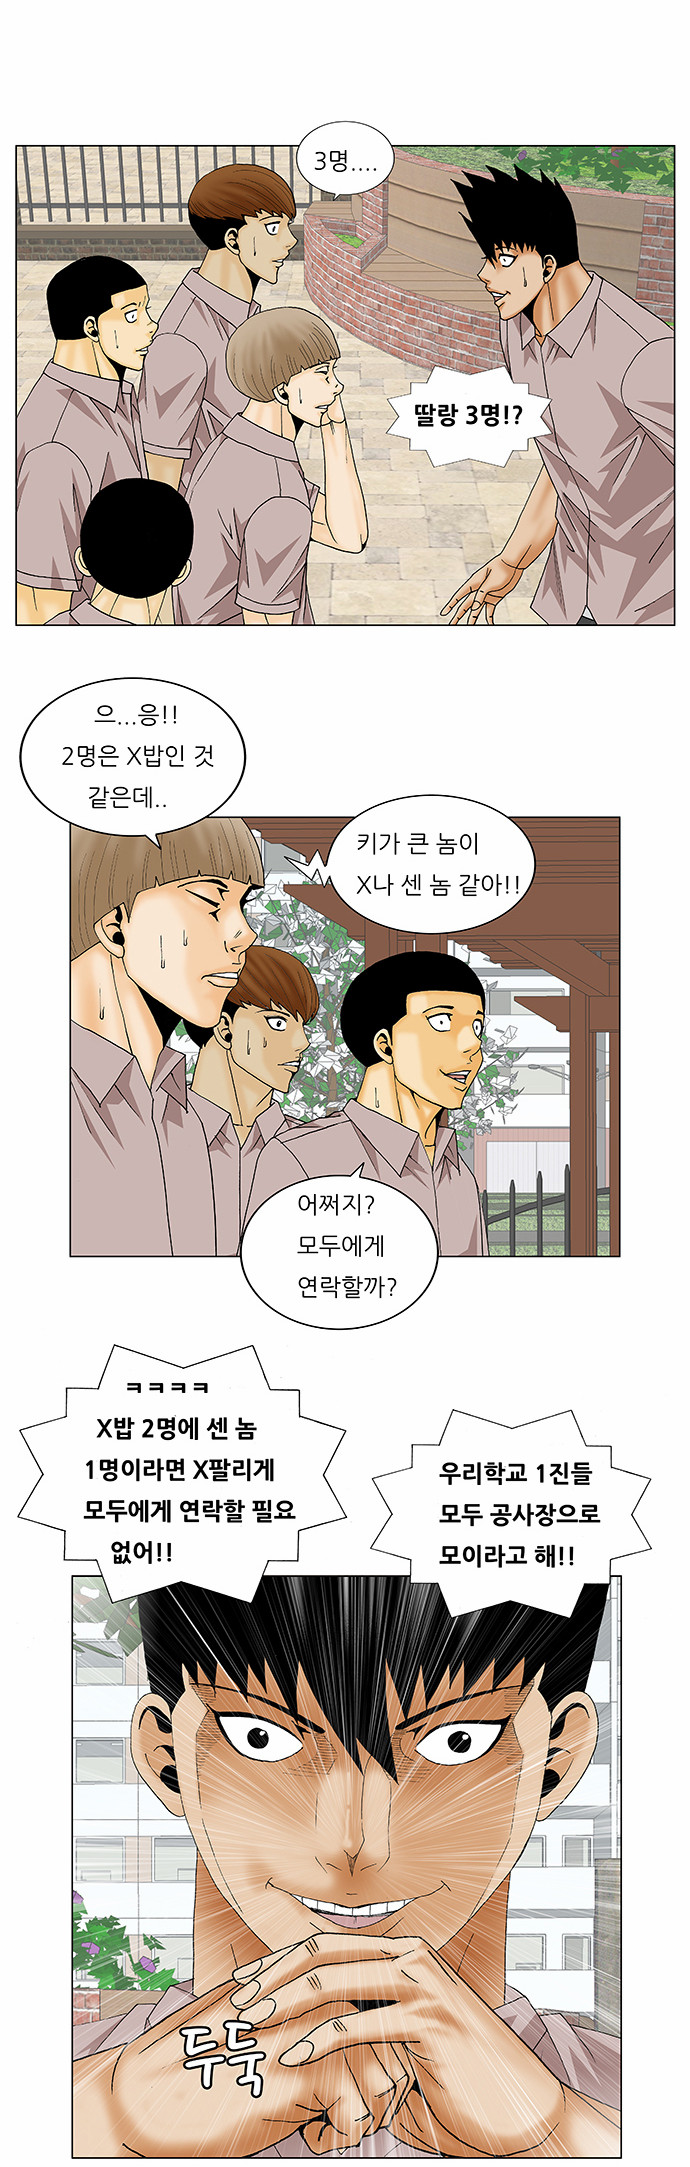 Ultimate Legend - Kang Hae Hyo - Chapter 141 - Page 2